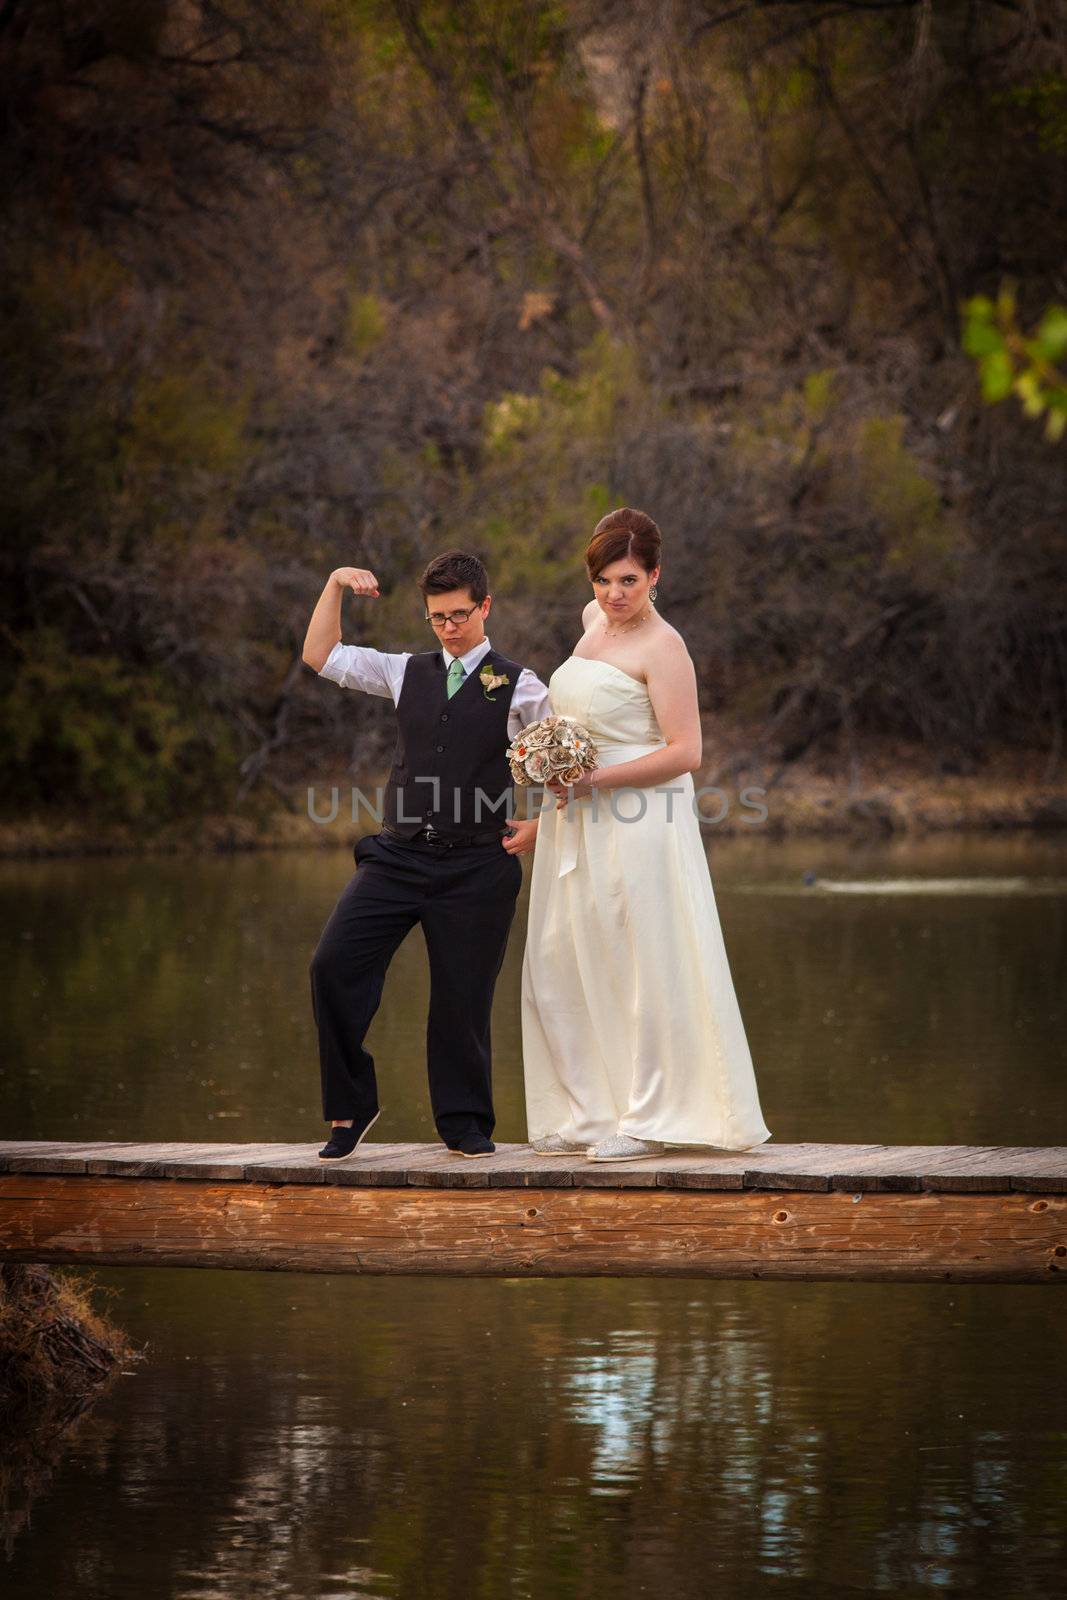 Macho lesbian groom with bride on dock over pond